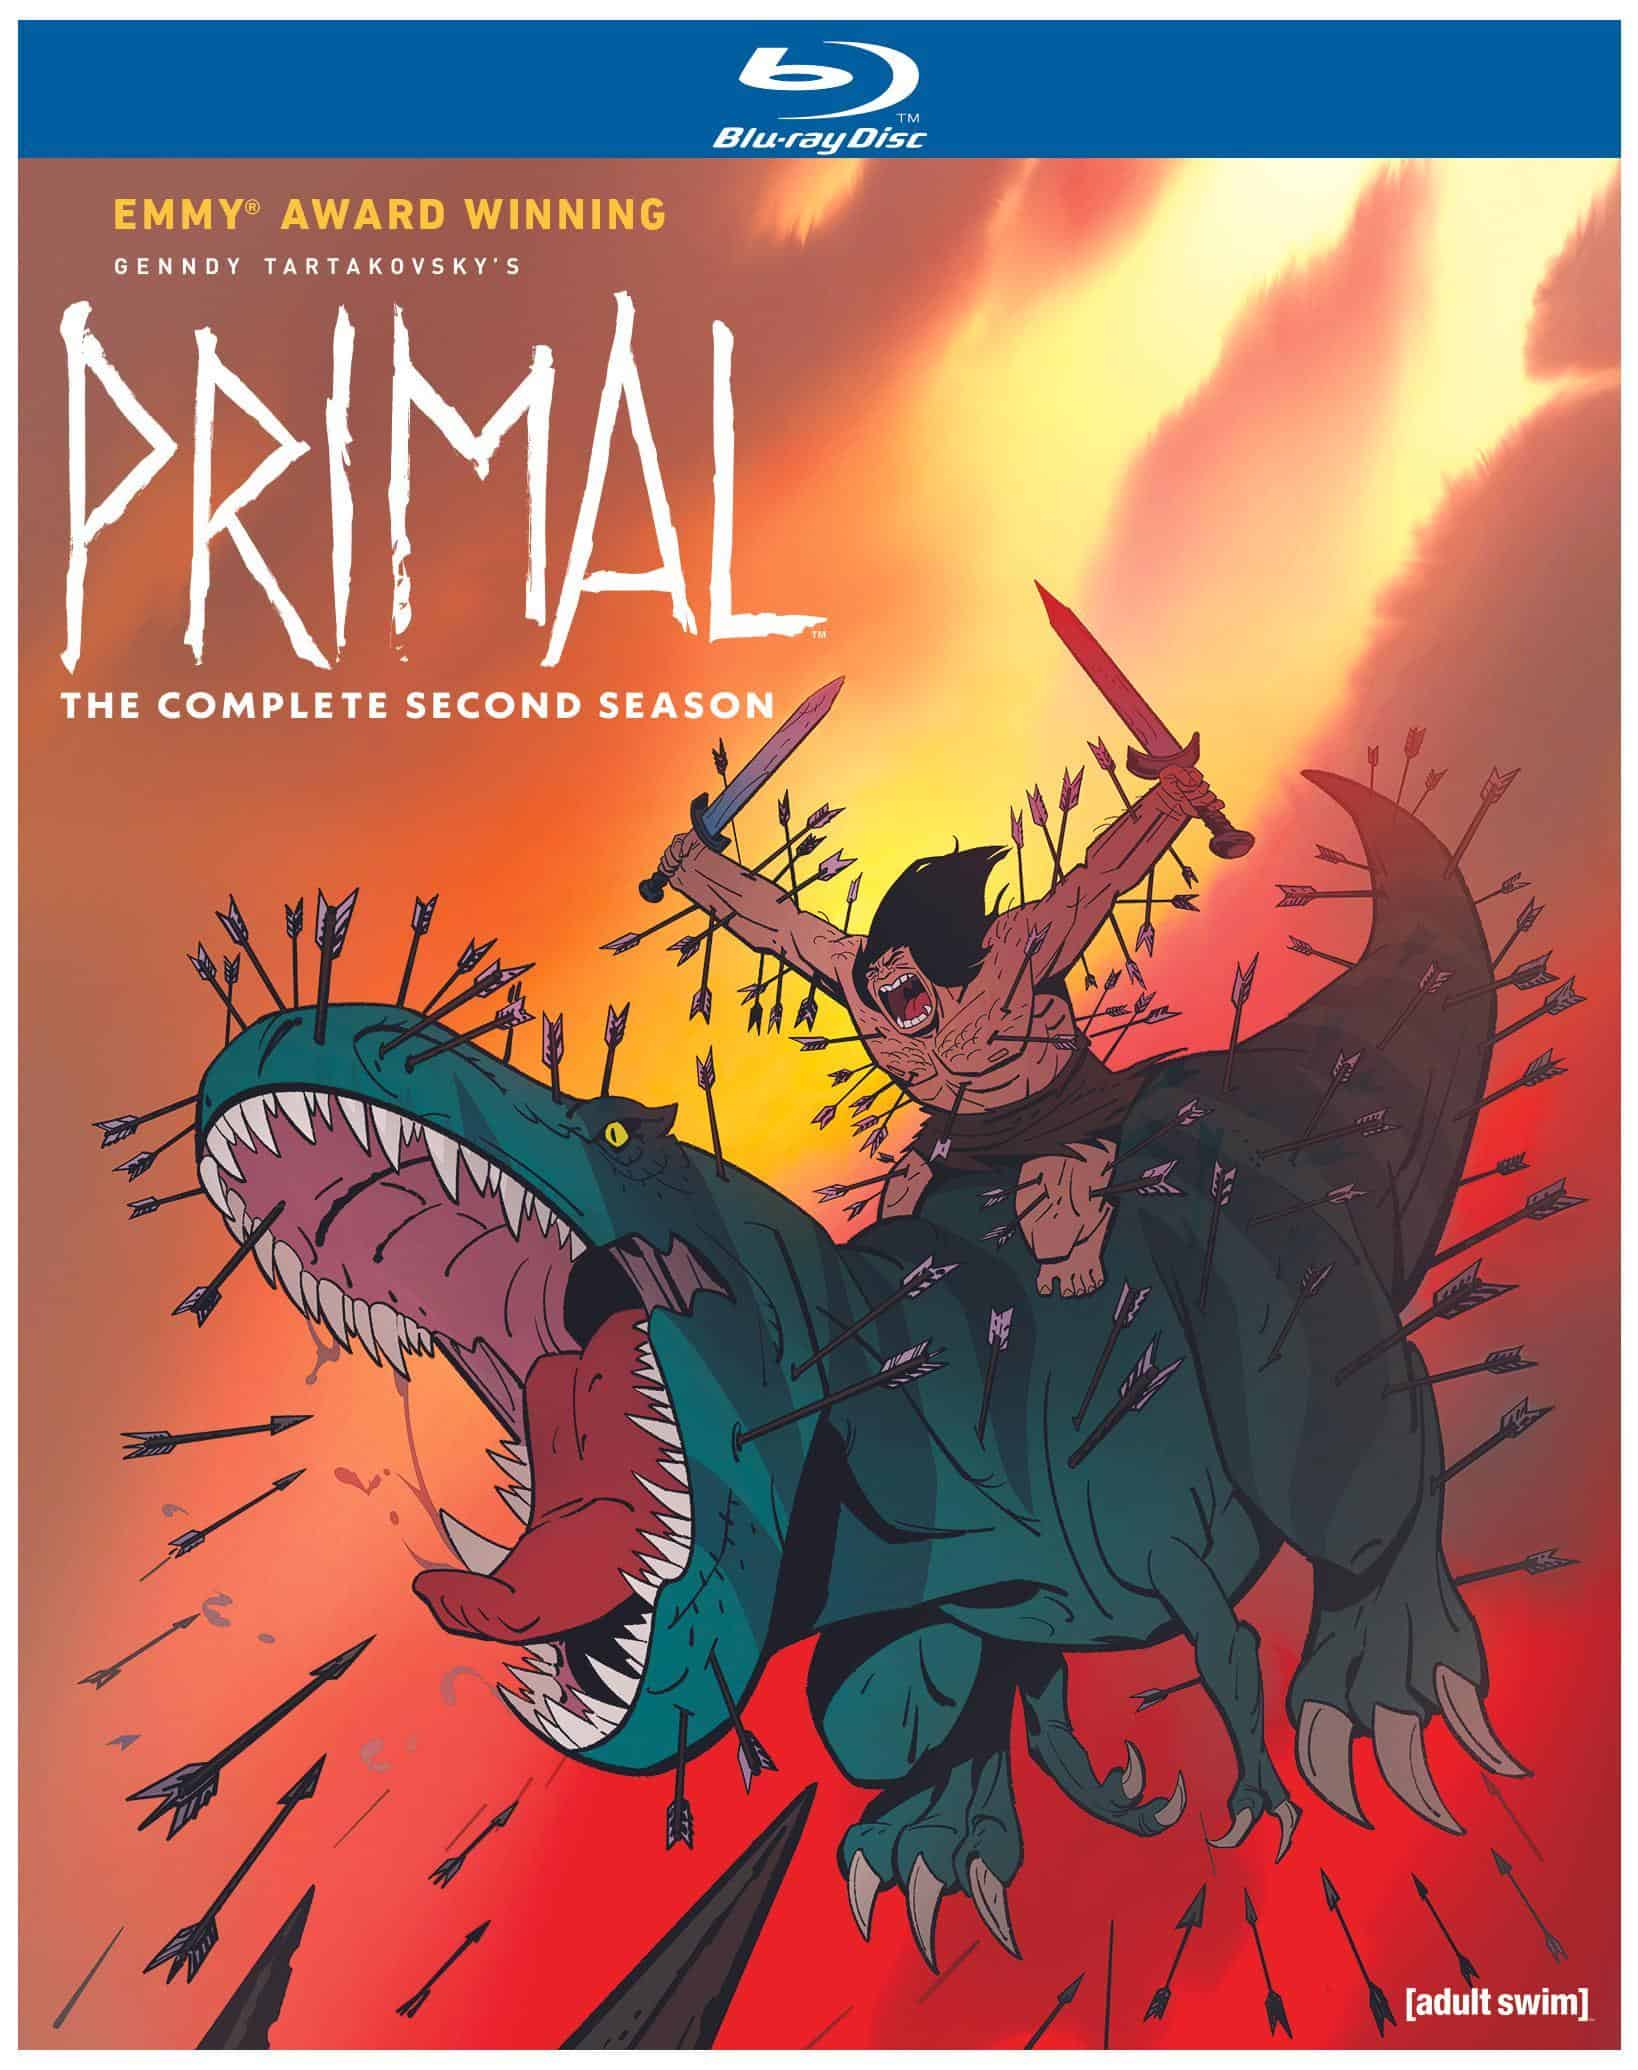 Primal: The Complete Second Season comes to Blu-ray April 25th 20